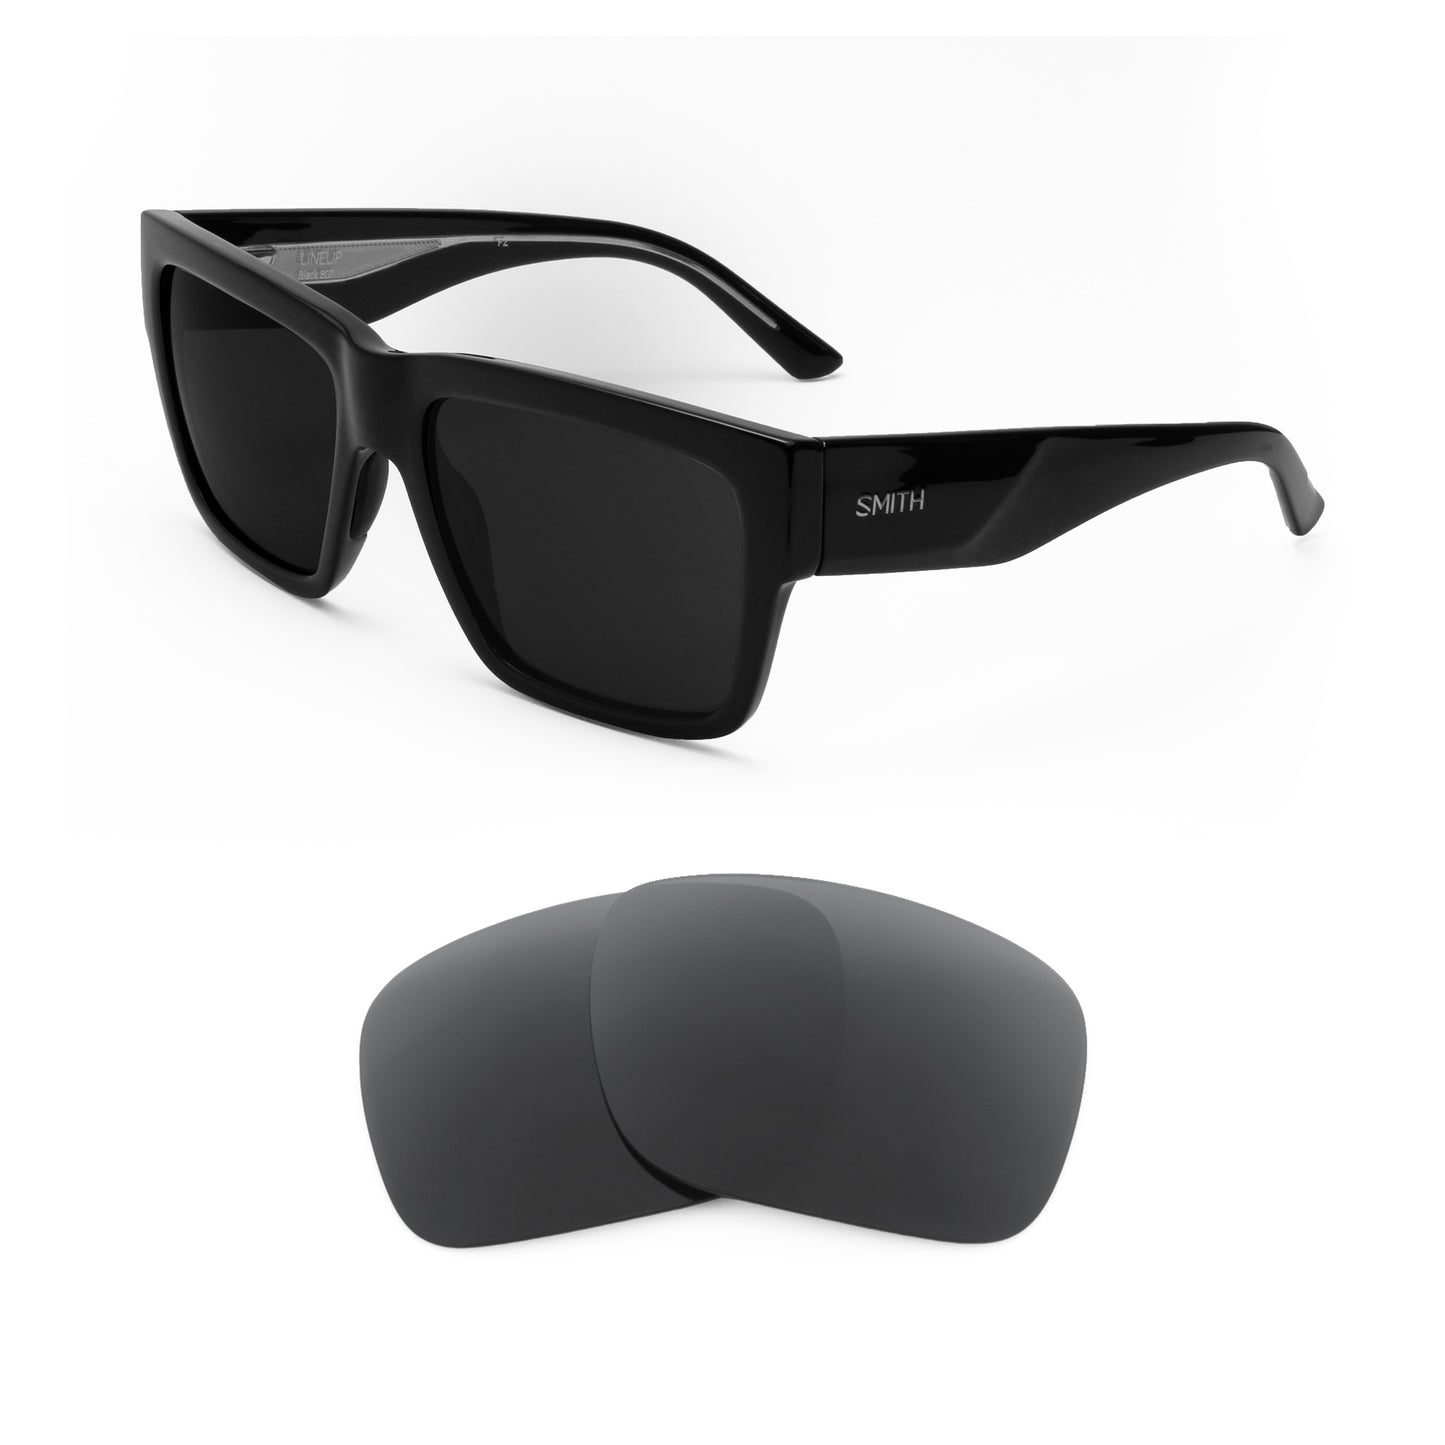 Smith Lineup sunglasses with replacement lenses